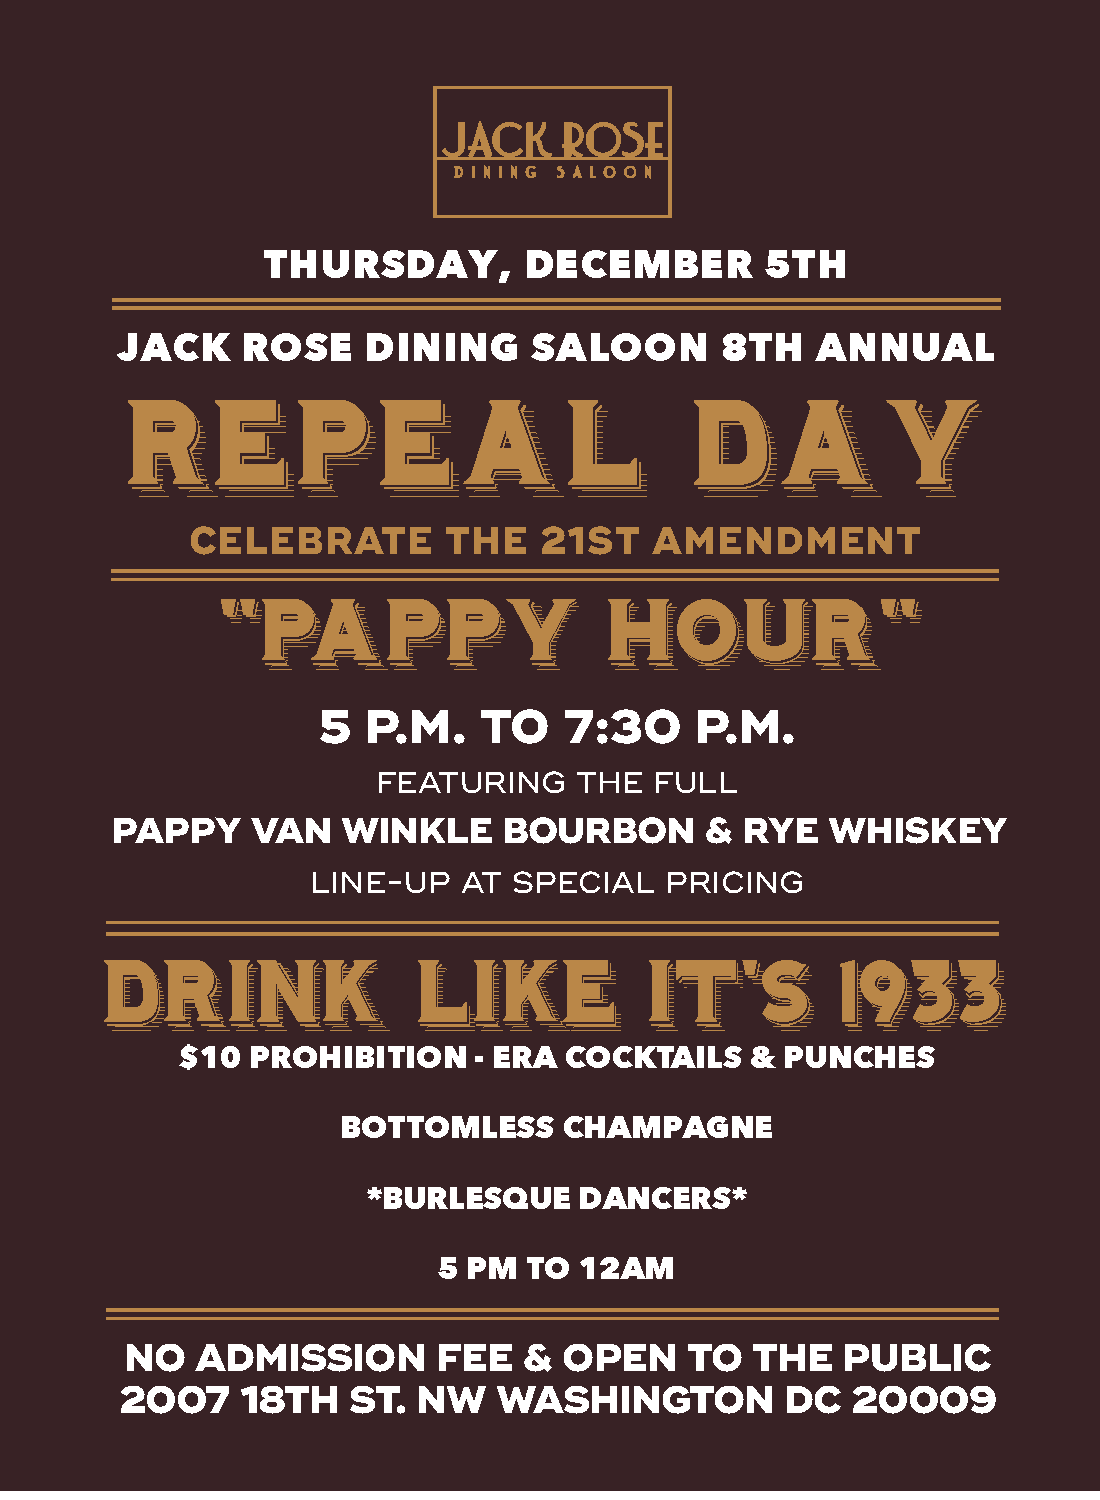 Repeal Day 2019 Jack Rose Dining Saloon Washington, DC